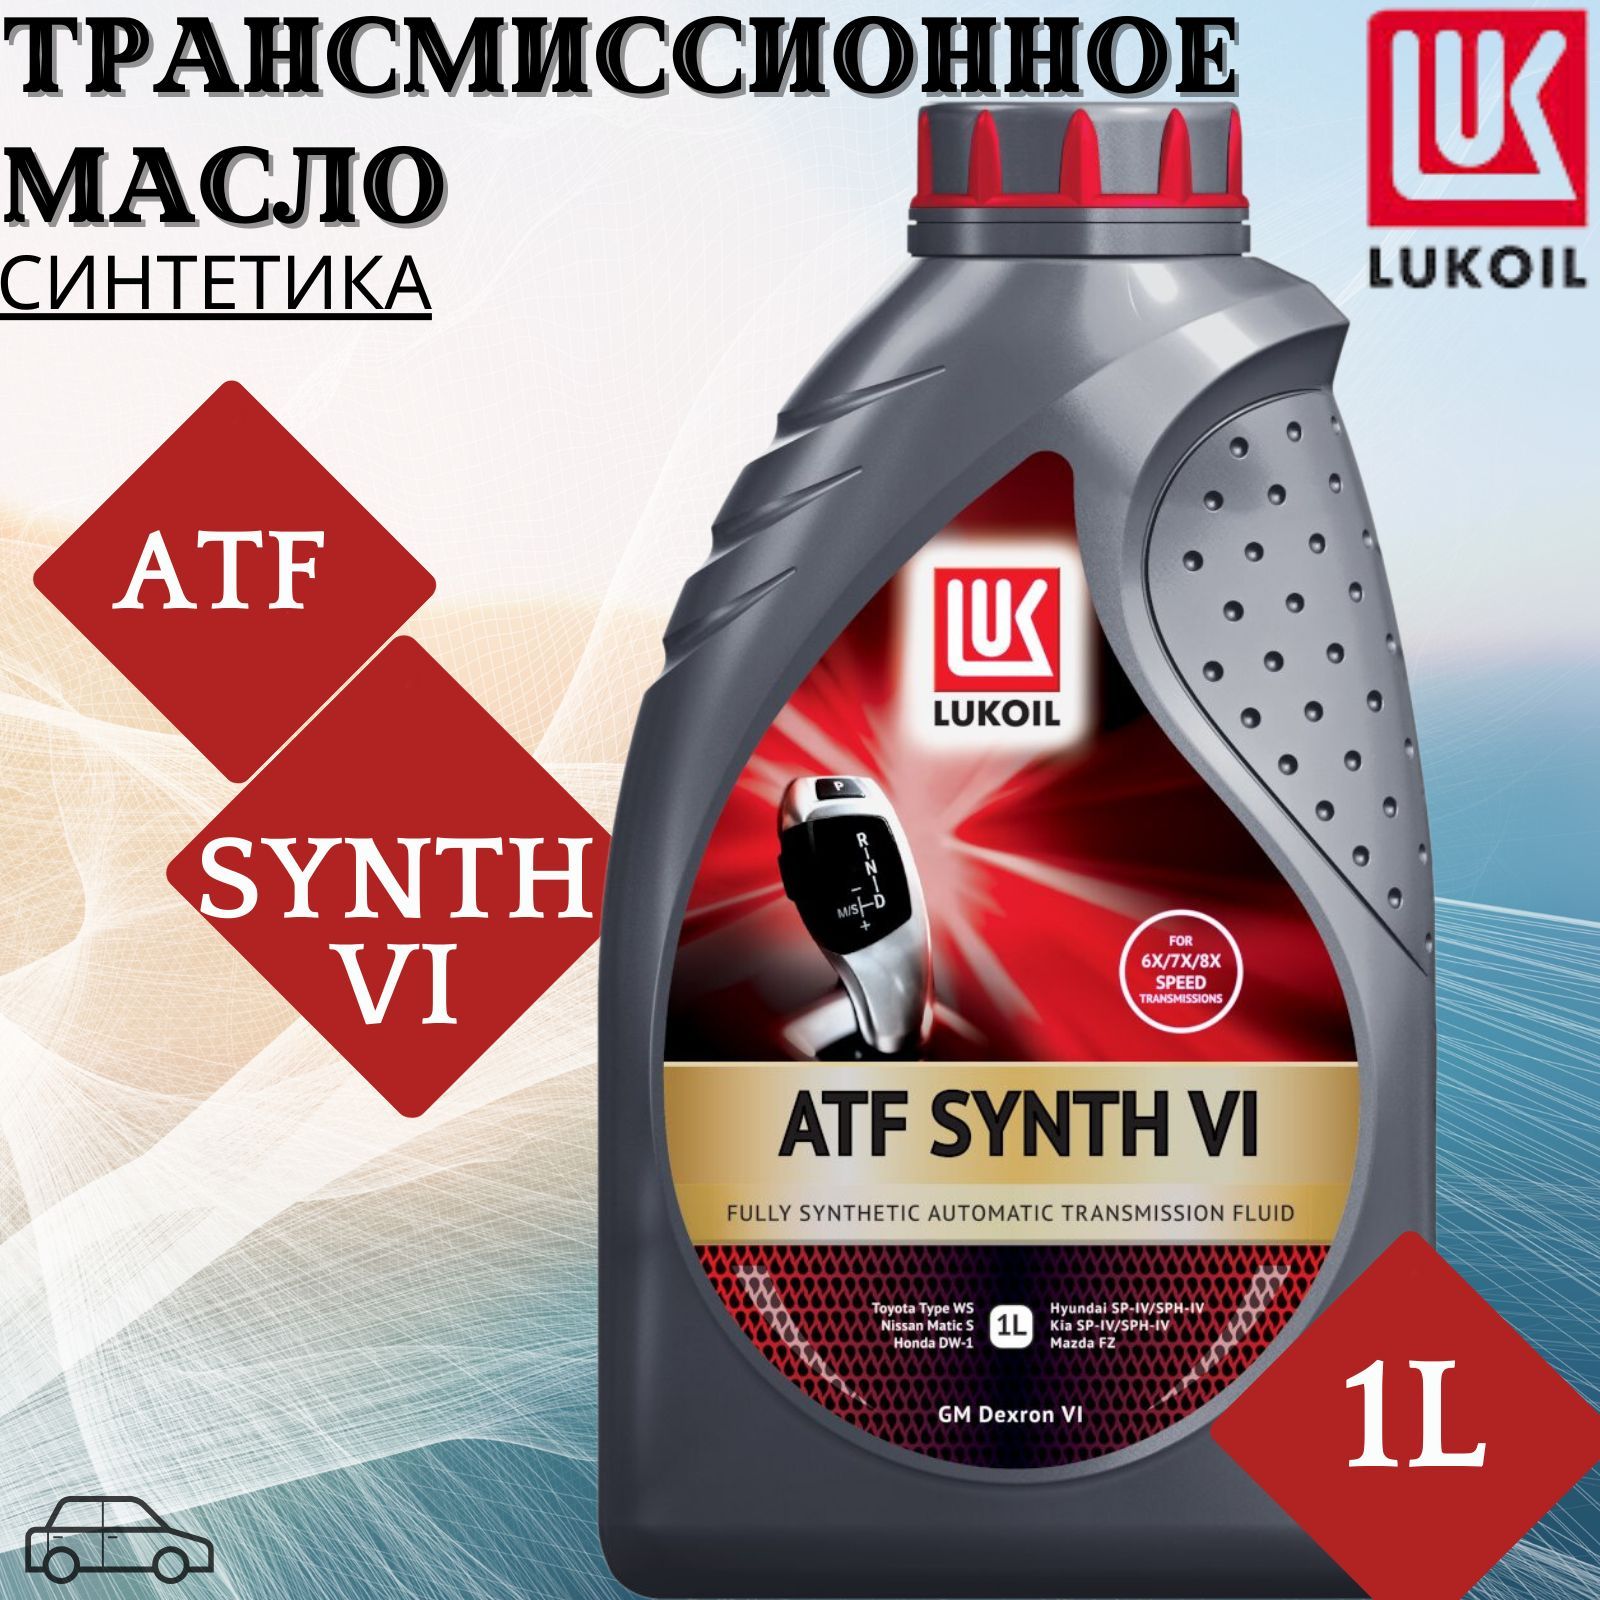 Atf synth vi. Лукойл ATF Synth v.